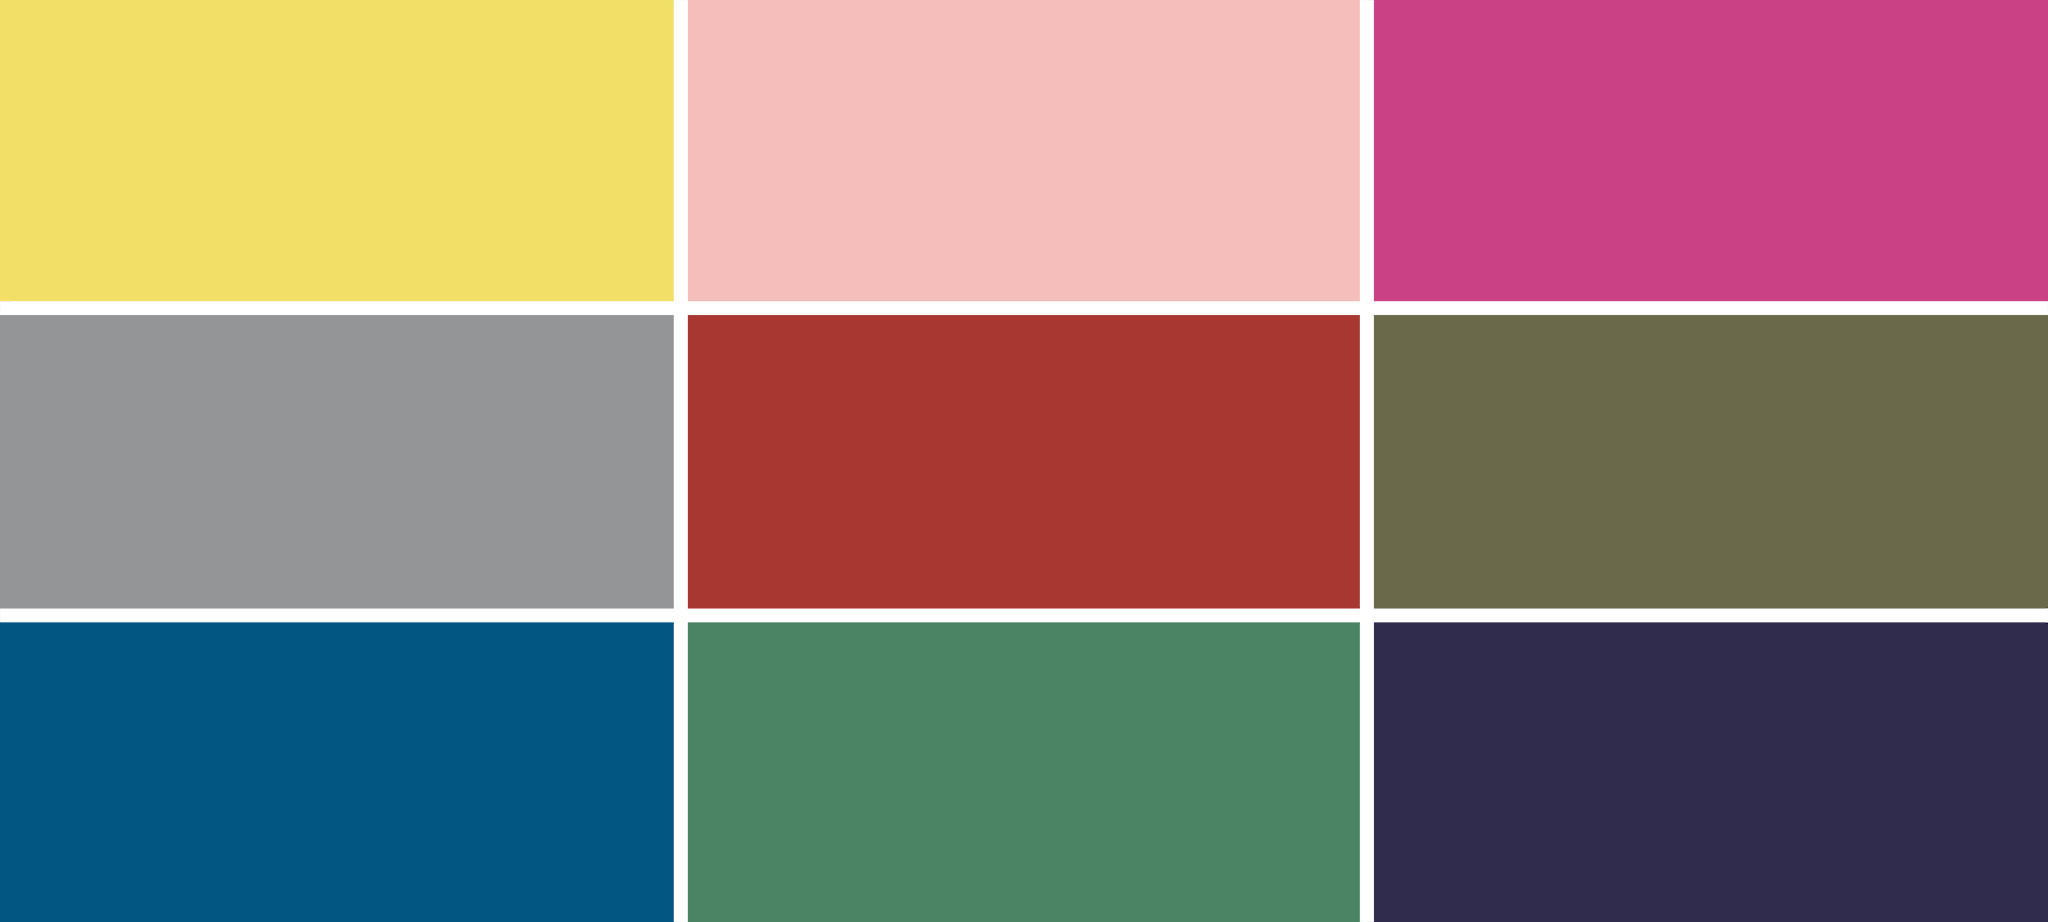 pantone color trend autumn/winter 2021/2022 - Style At A Certain Age